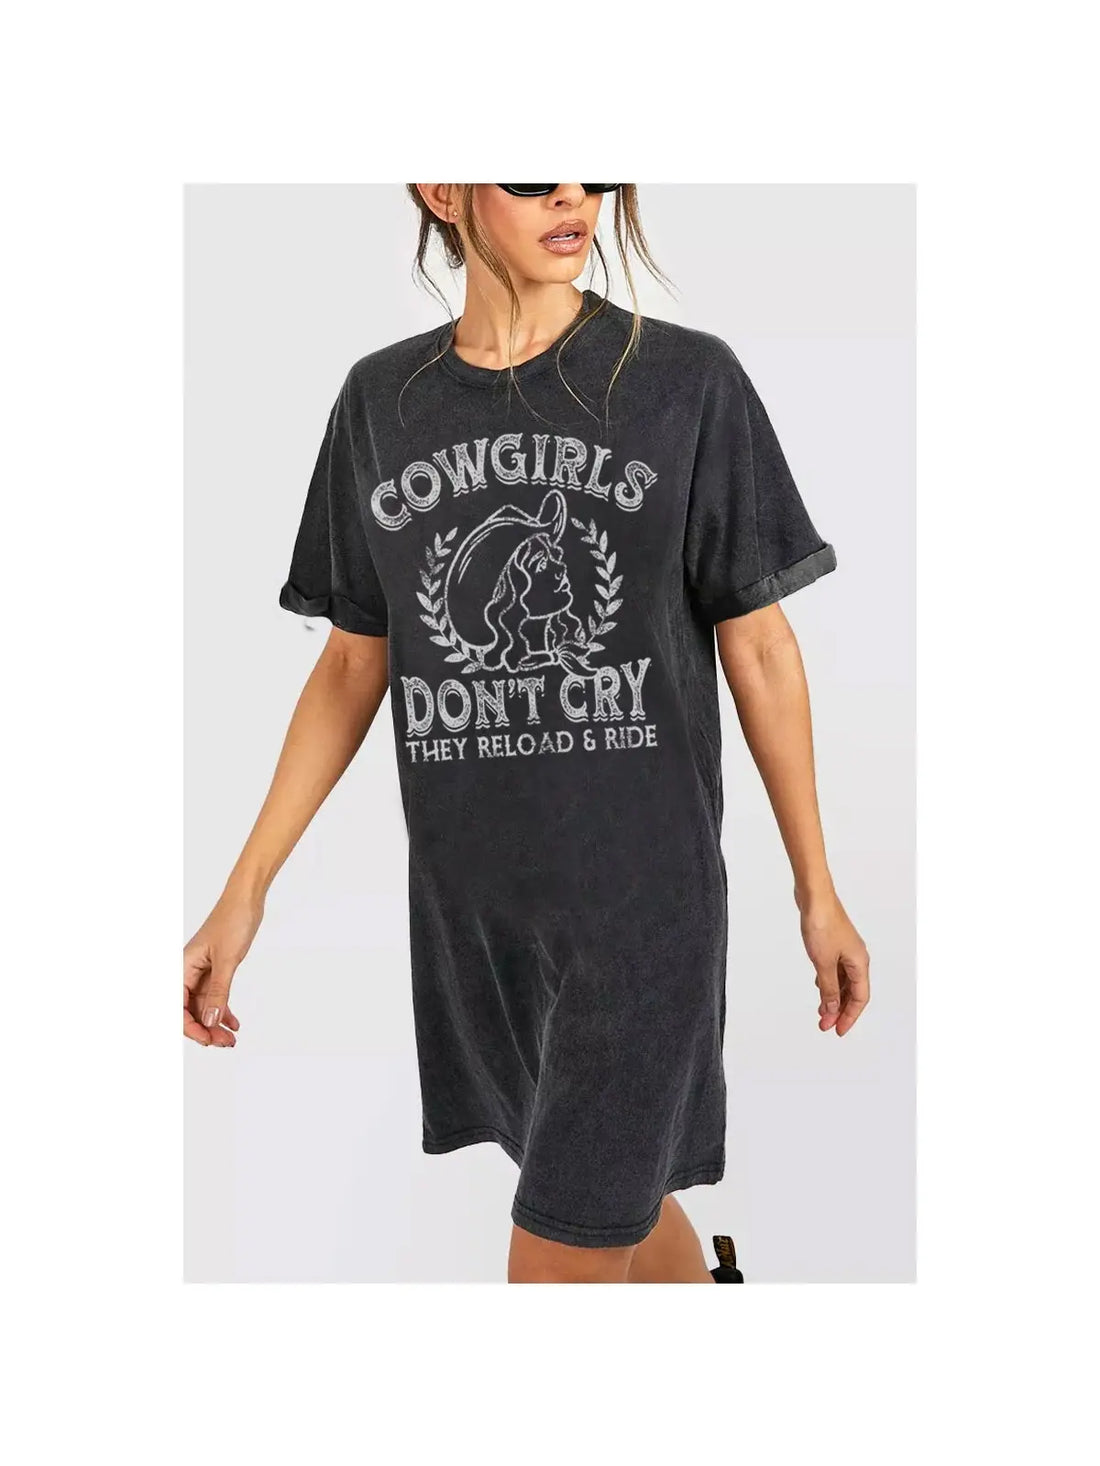 HRT&LUV COWGIRLS DONT CRY T-DRESS